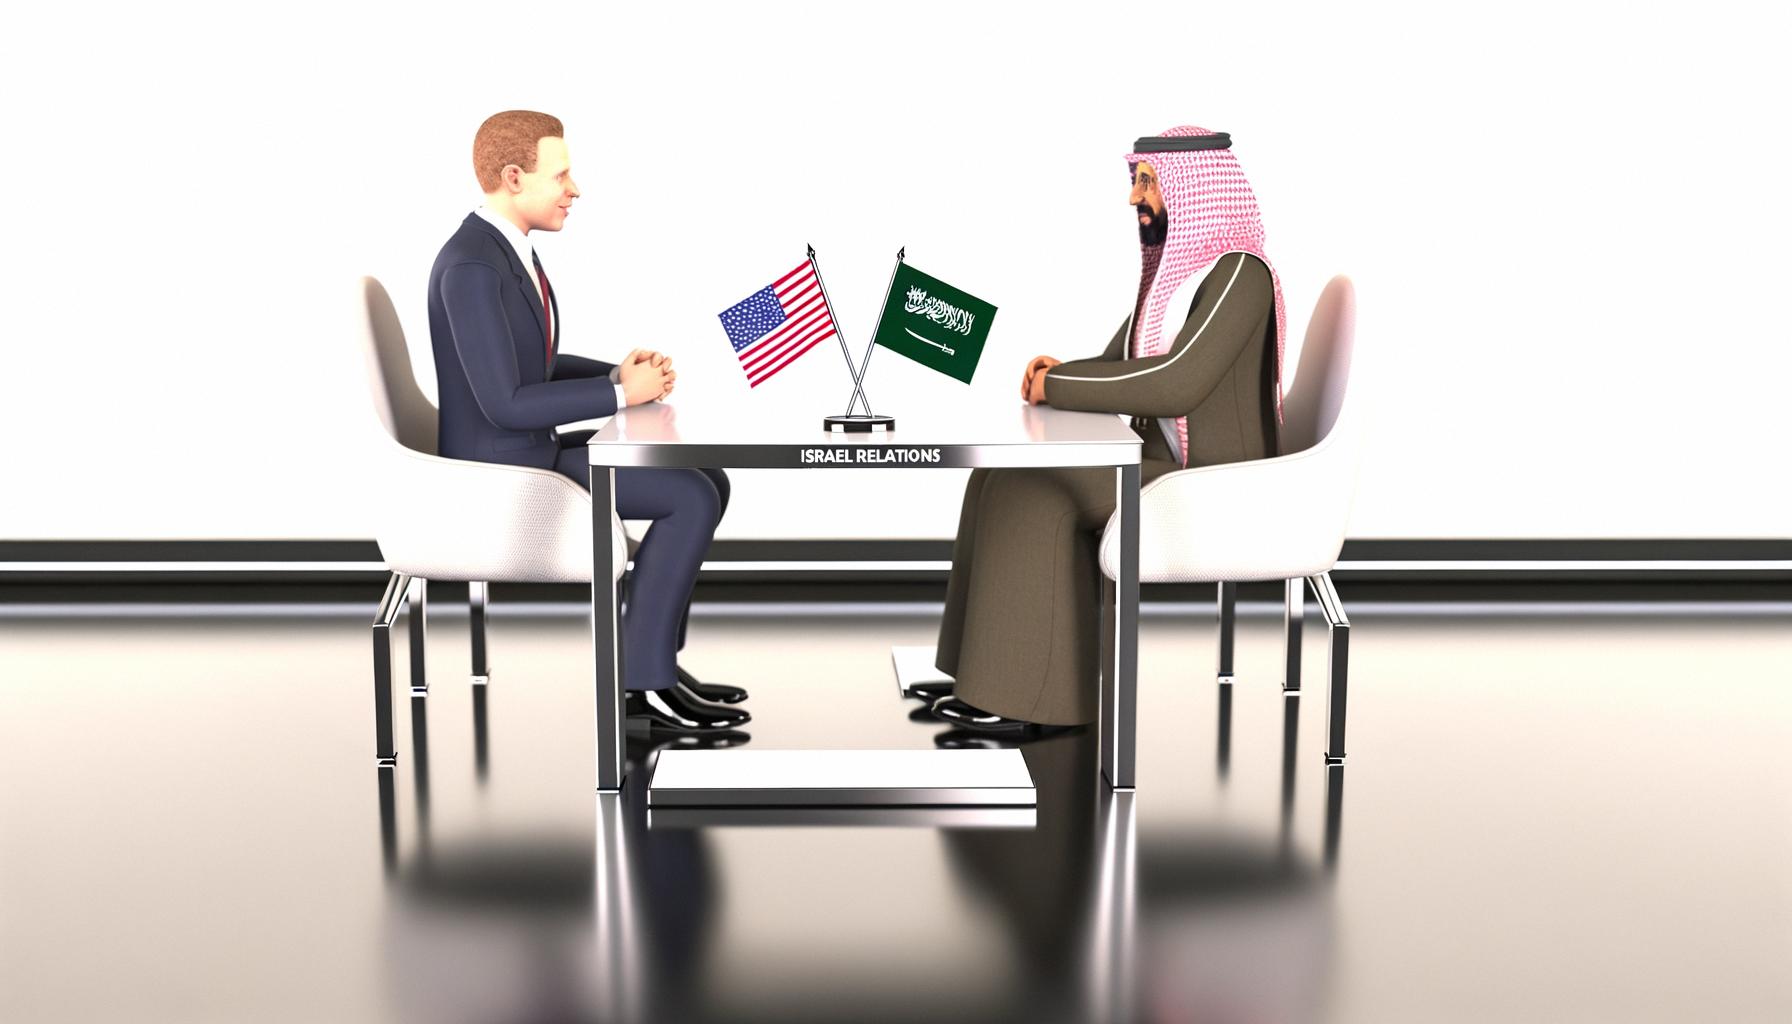 US and Saudi Arabia nearing agreement to normalize relations with Israel.